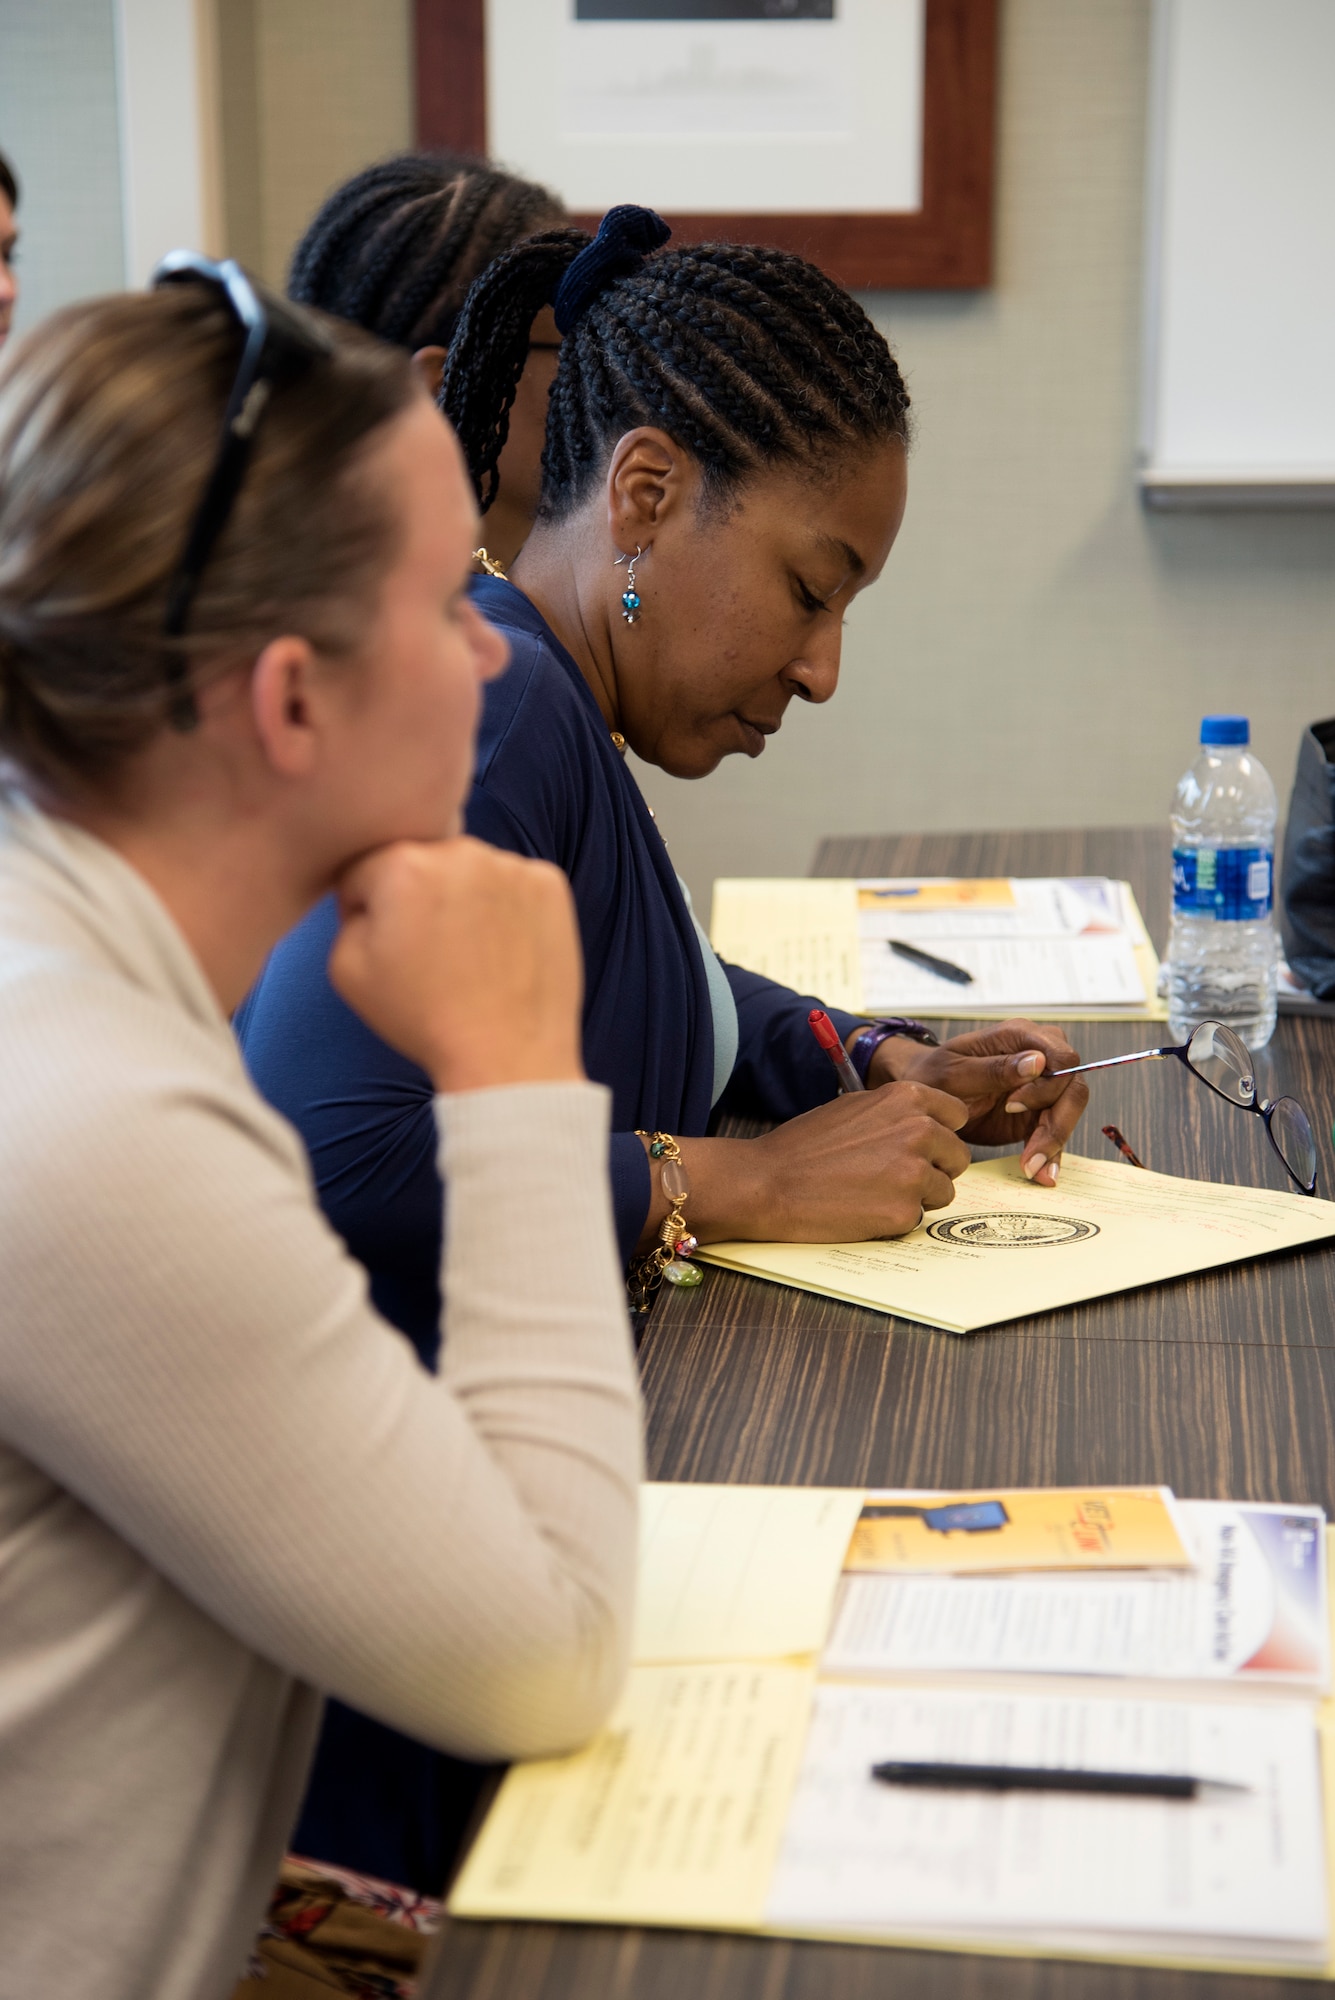 Airmen attend Women’s Health Transition Pilot Program course July 31, 2018, at MacDill Air Force Base, Fla. The pilot program is an in-person course designed to provide a female perspective to active-duty, Reserve and Guard servicewomen who plan to transition to civilian or Reserve/Guard status. (U.S. Air Force photo by Senior Airman Ashley Perdue)